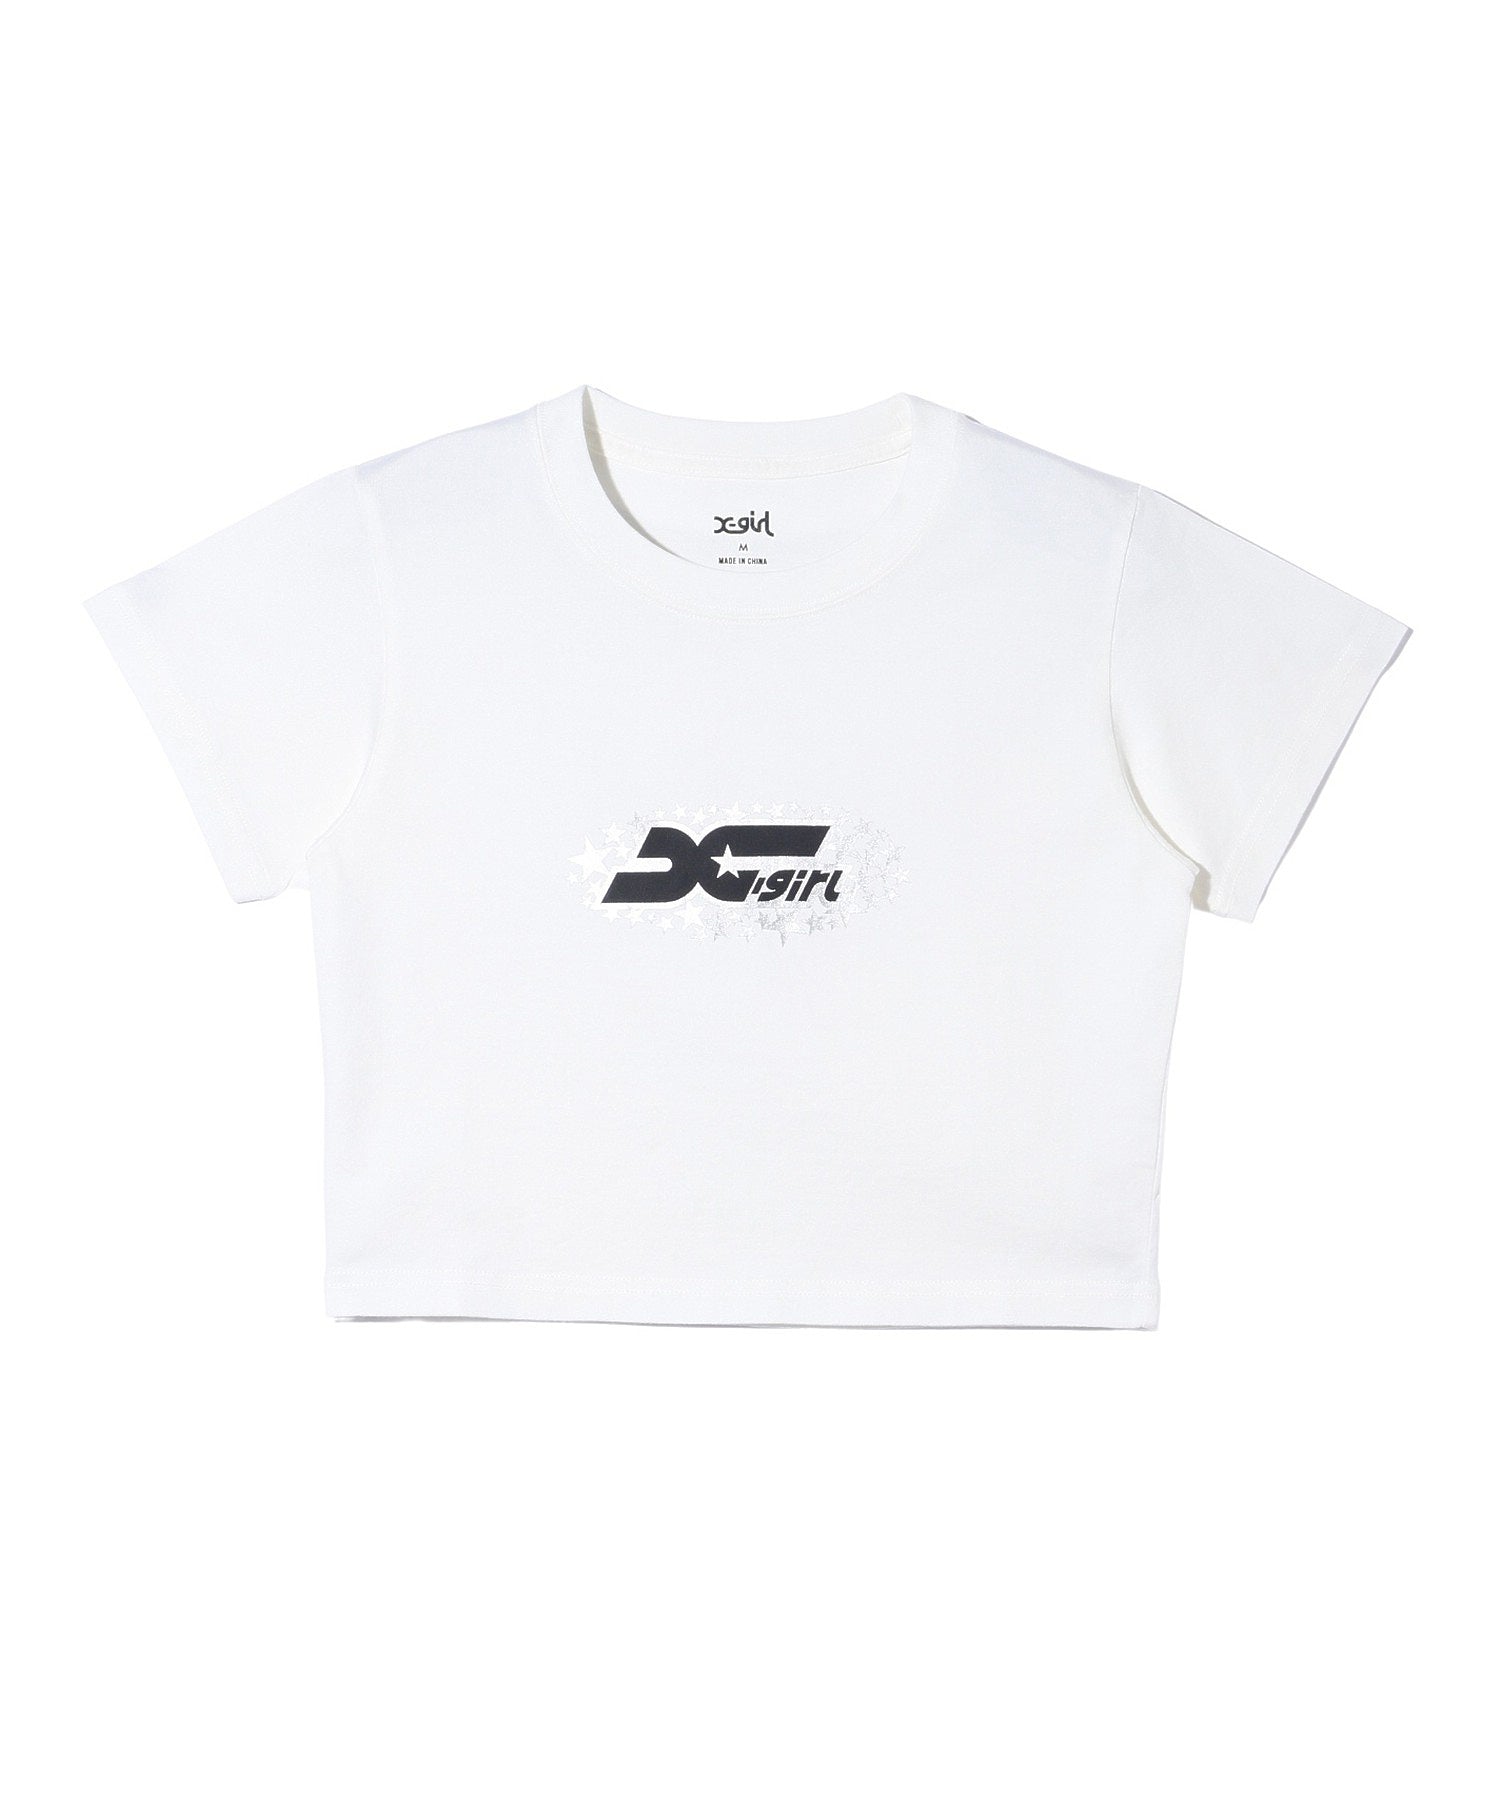 STAR LOGO S/S CROPPED TEE